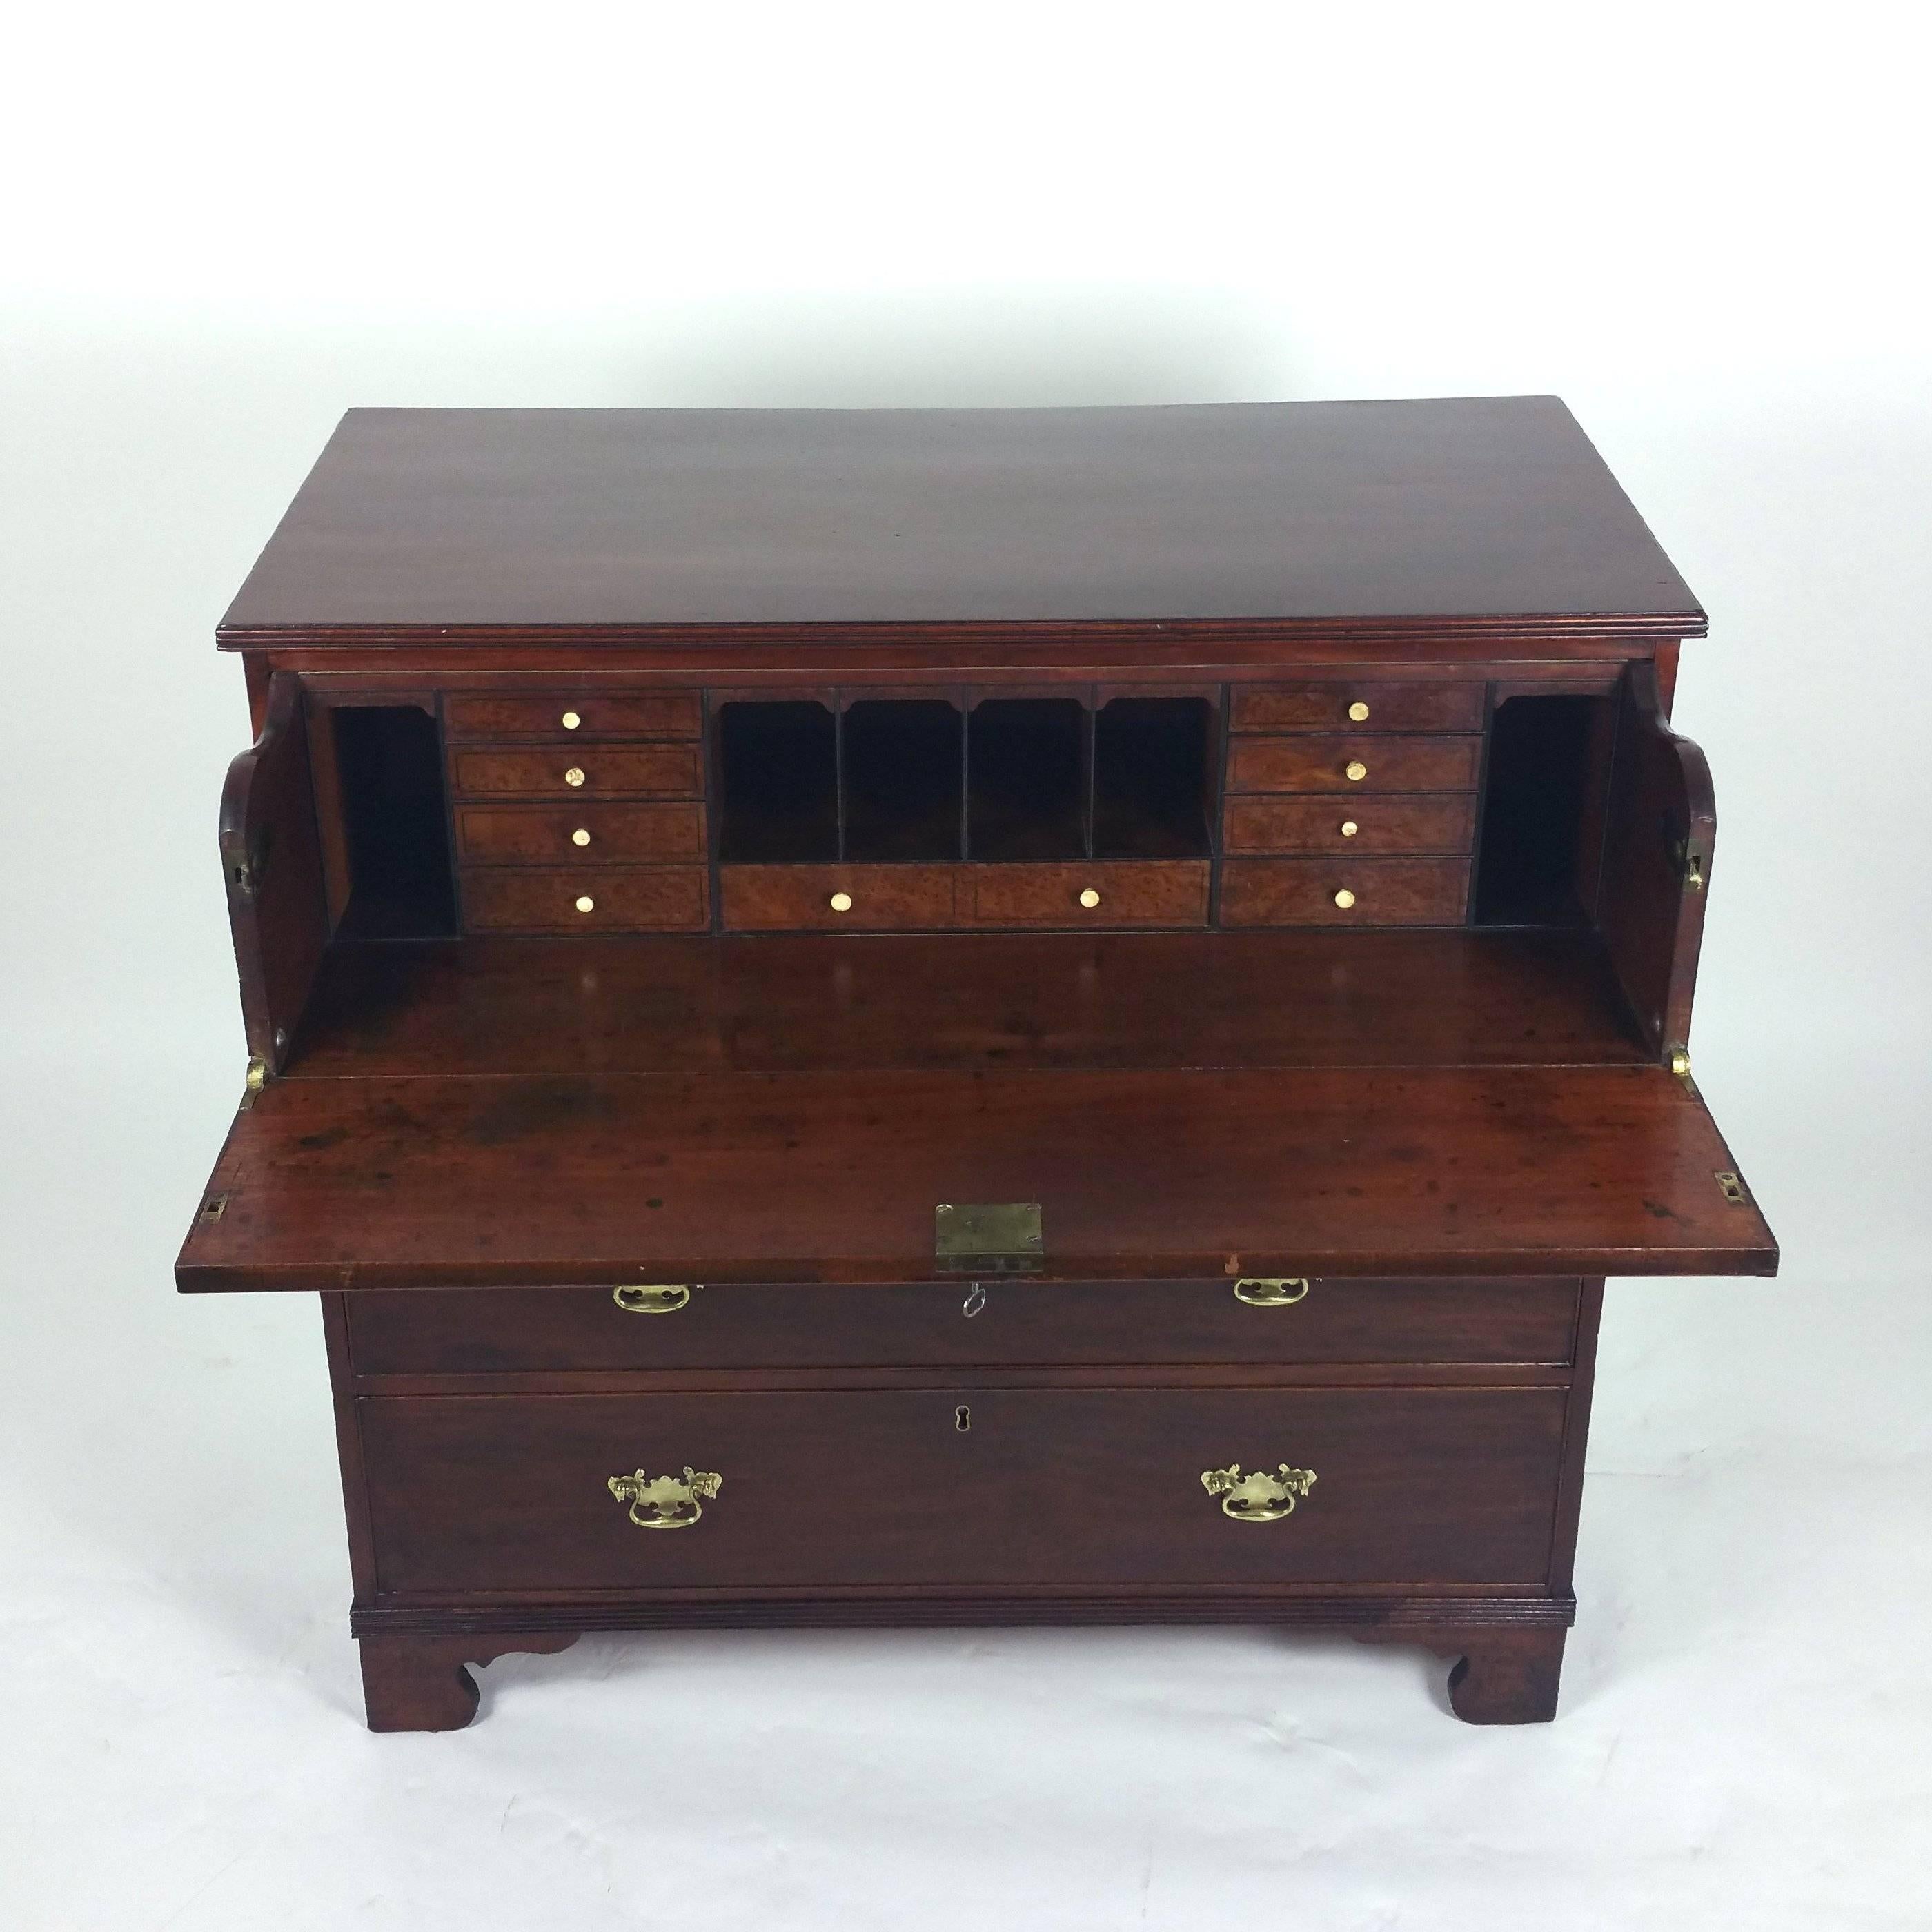 This beautiful and fine quality George III mahogany gentlemen’s Secretaire chest has an interior fitted with pigeonhole compartments and Amboyna drawers set over 3 graduated long drawers with brass pull rings. The chest stands on bracket feet with a